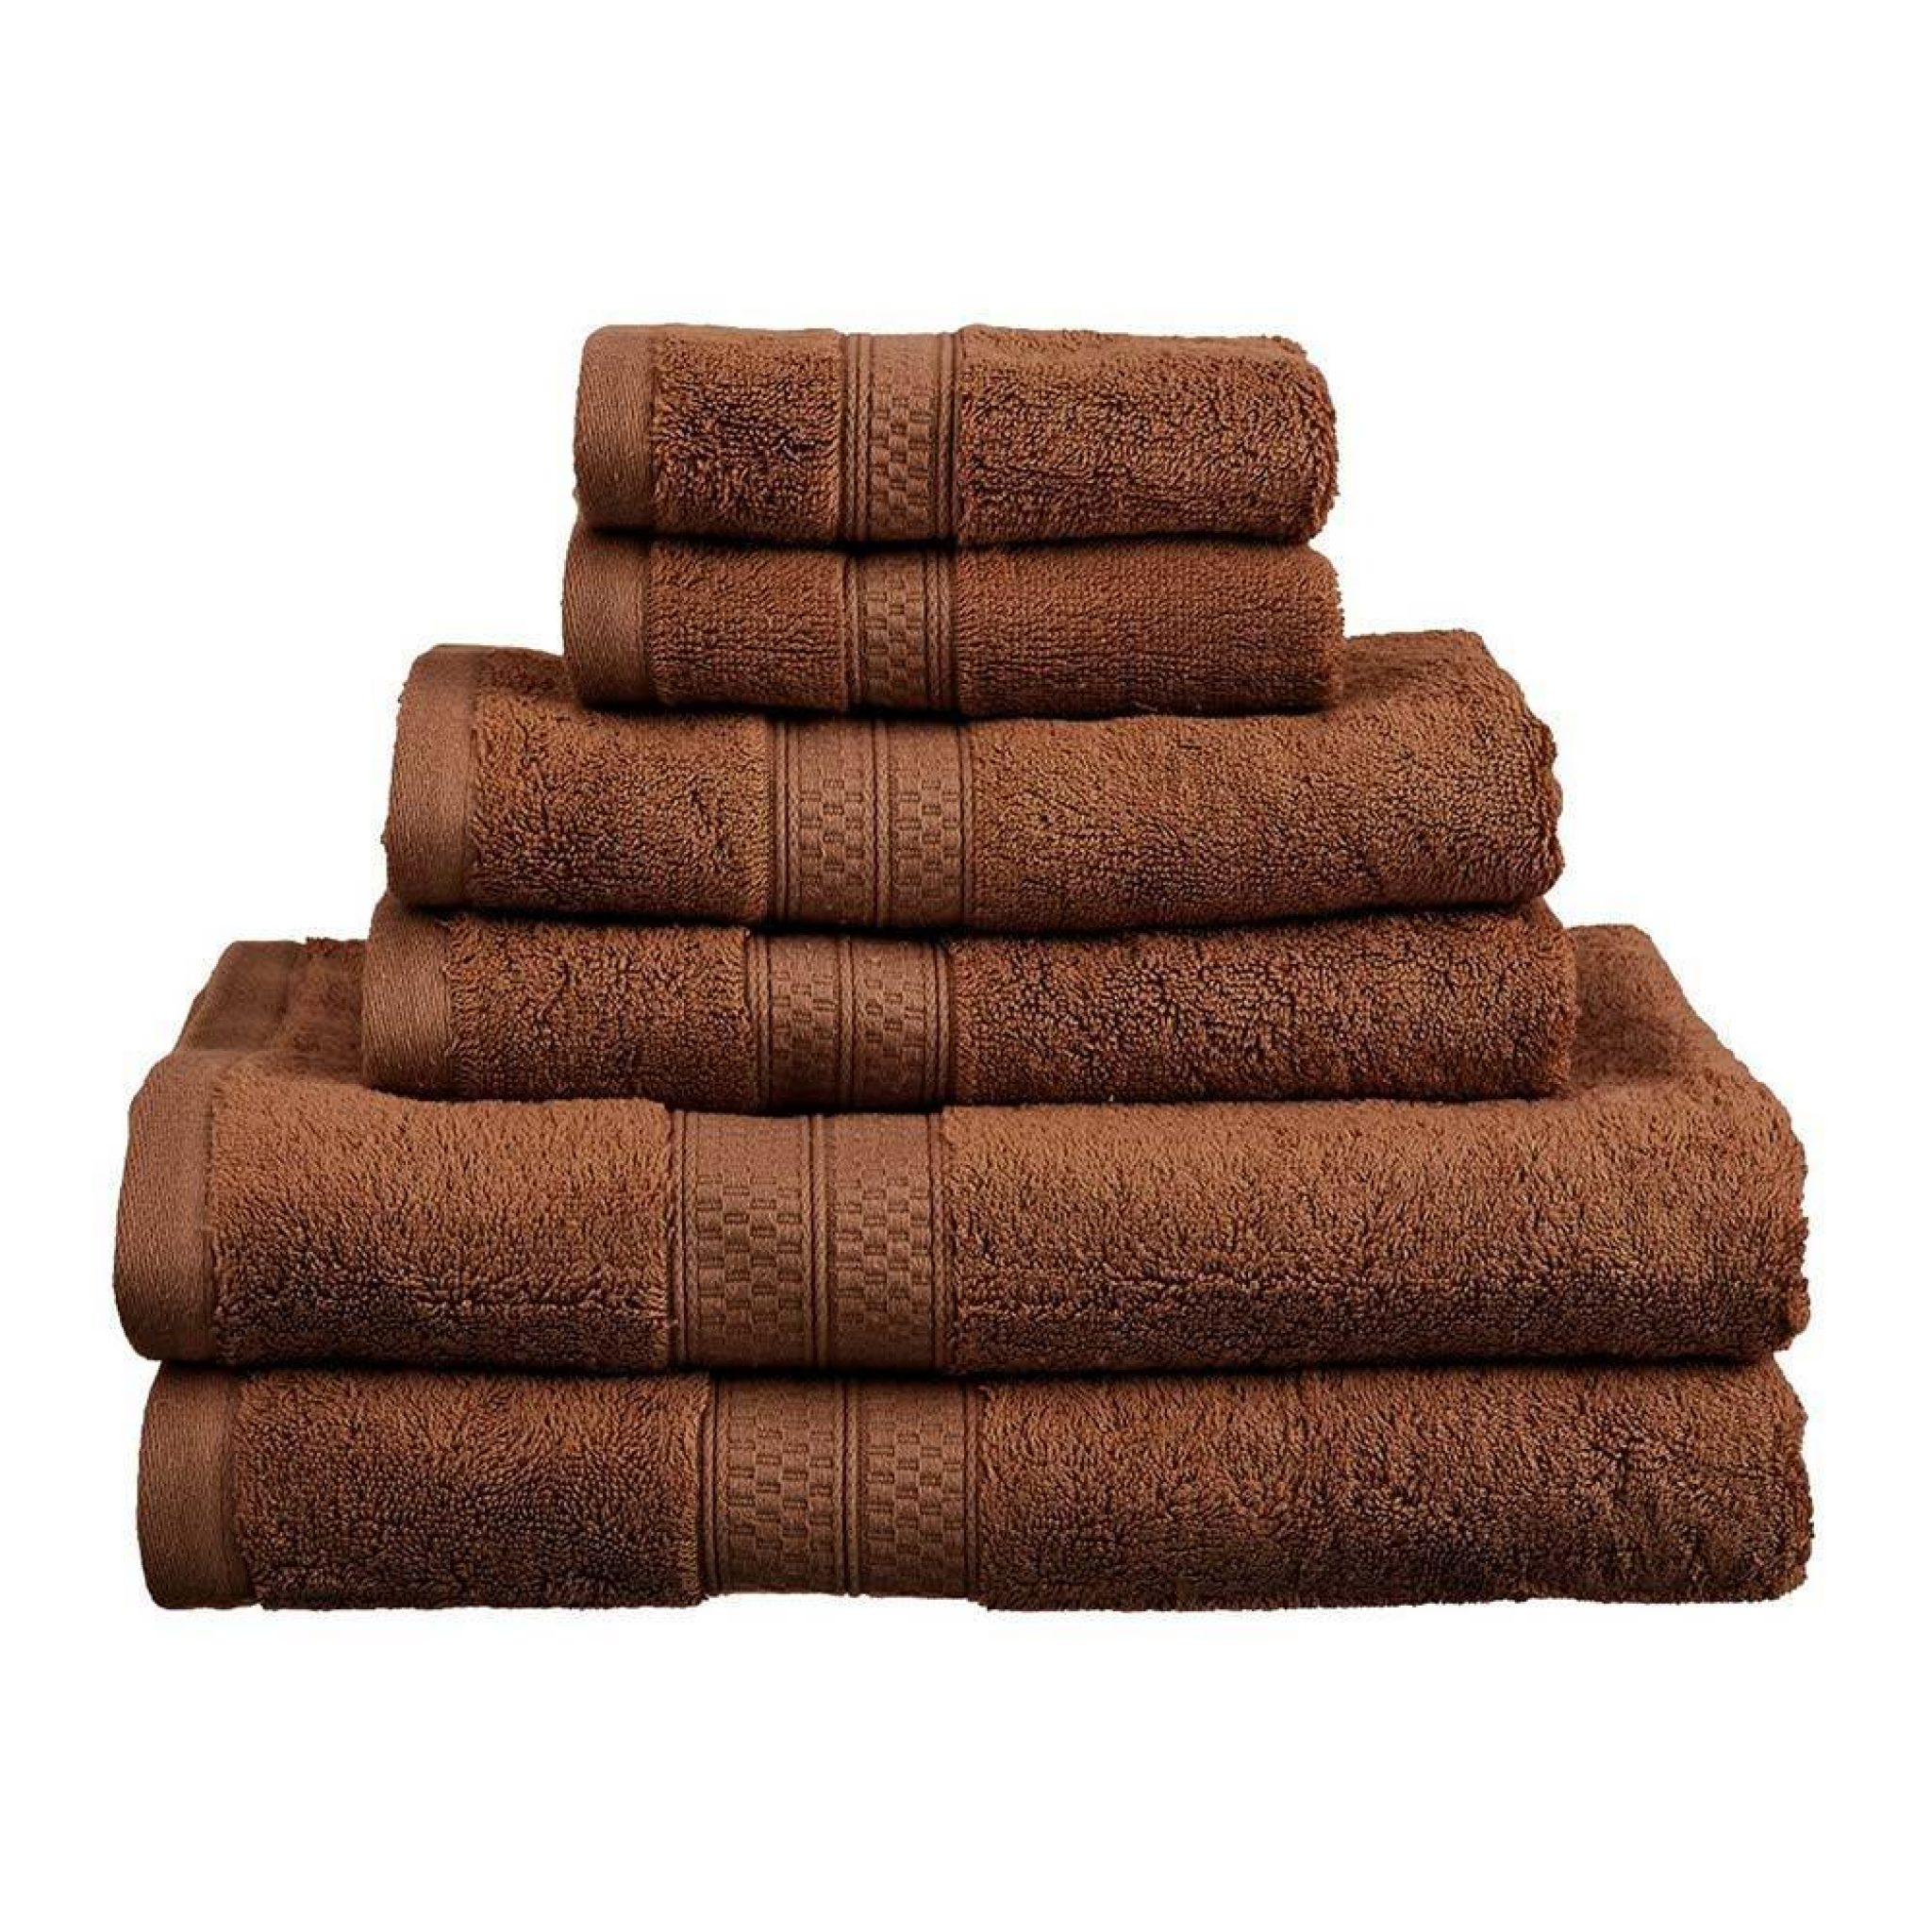 Bamboo Towels Reviews, A Guide to the Best of [Updated 2021]!